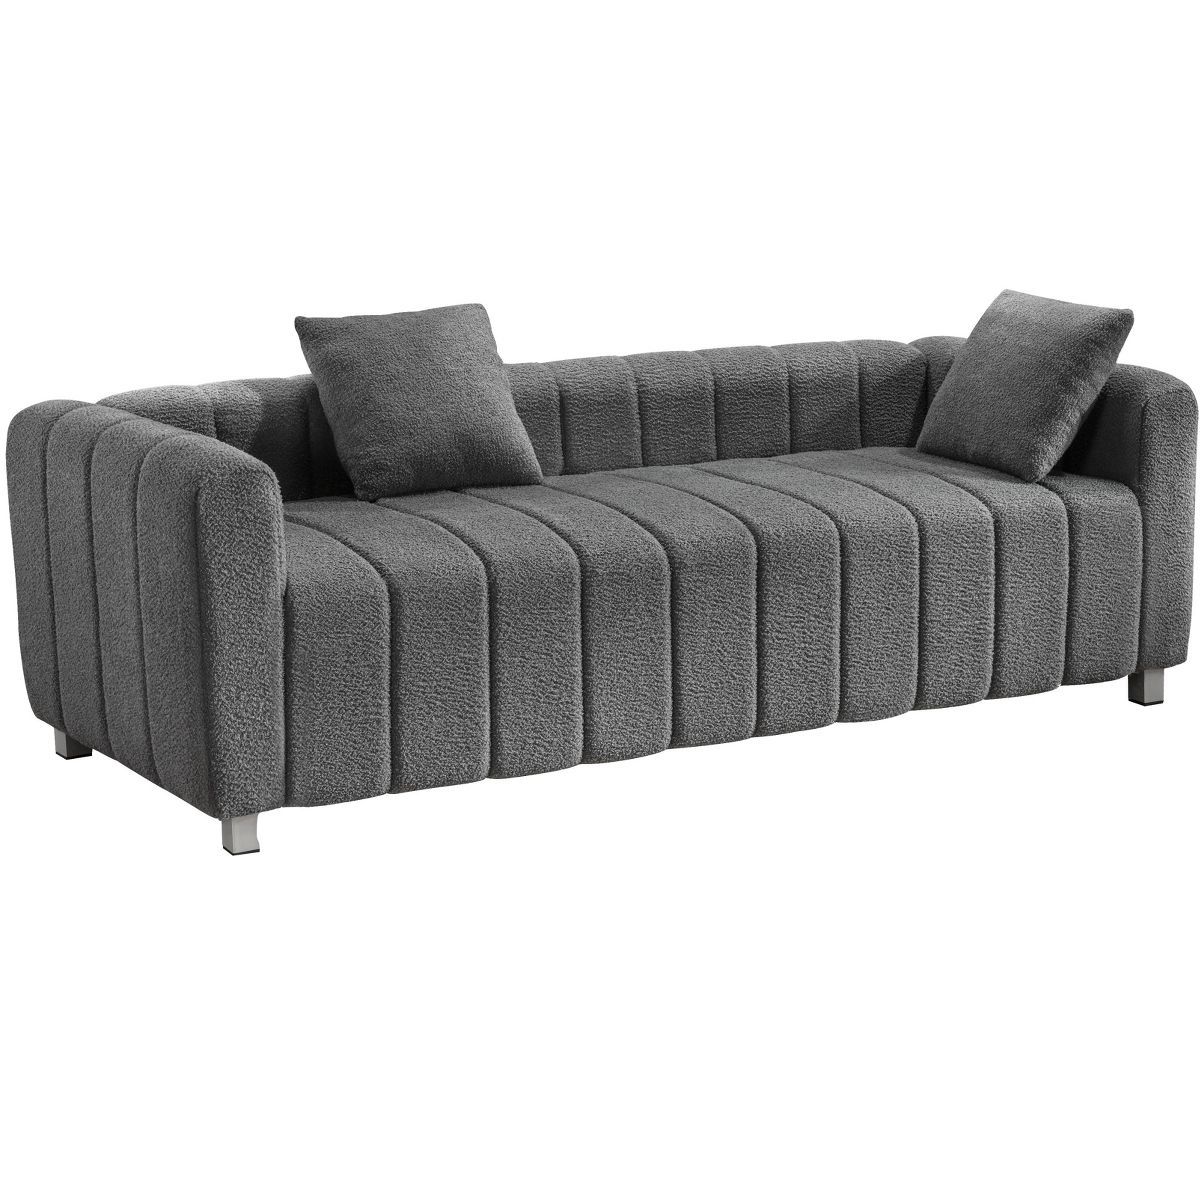 82" Teddy Velvet Upholstered Loveseat Sofa, 2-3 Seat Couch with Striped Decoration-ModernLuxe | Target